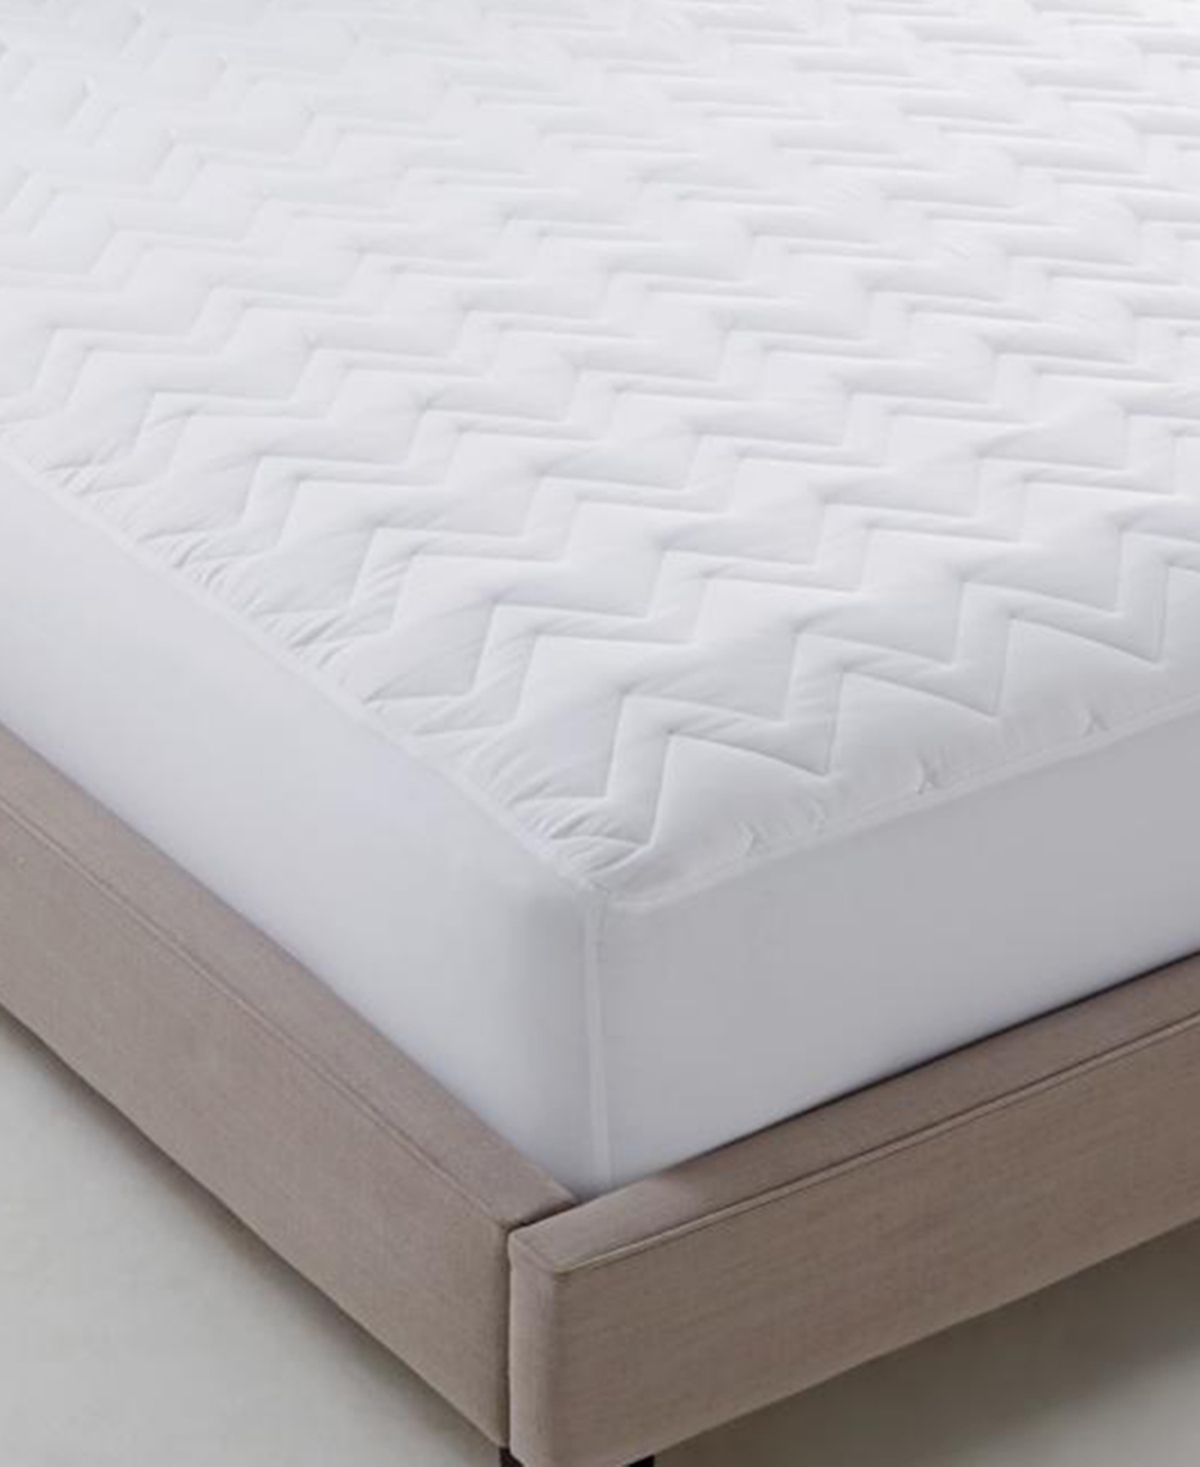 Shop Home Design Easy Care Classic Mattress Pads, Full, Created For Macy's In White